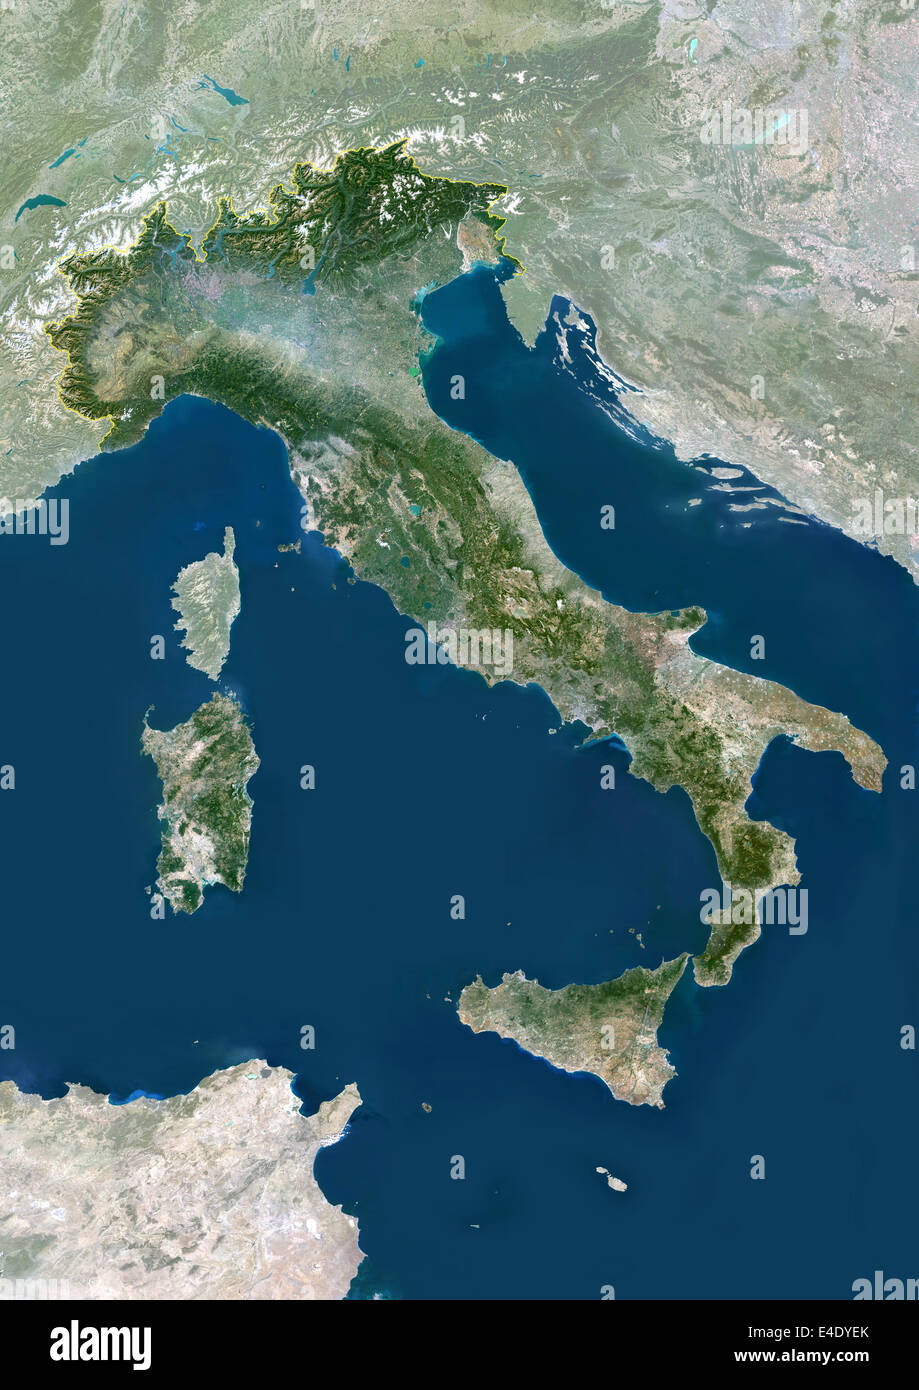 Italy, True Colour Satellite Image With Mask And Border. Italy, true colour satellite image with mask and border. Italy comprise Stock Photo